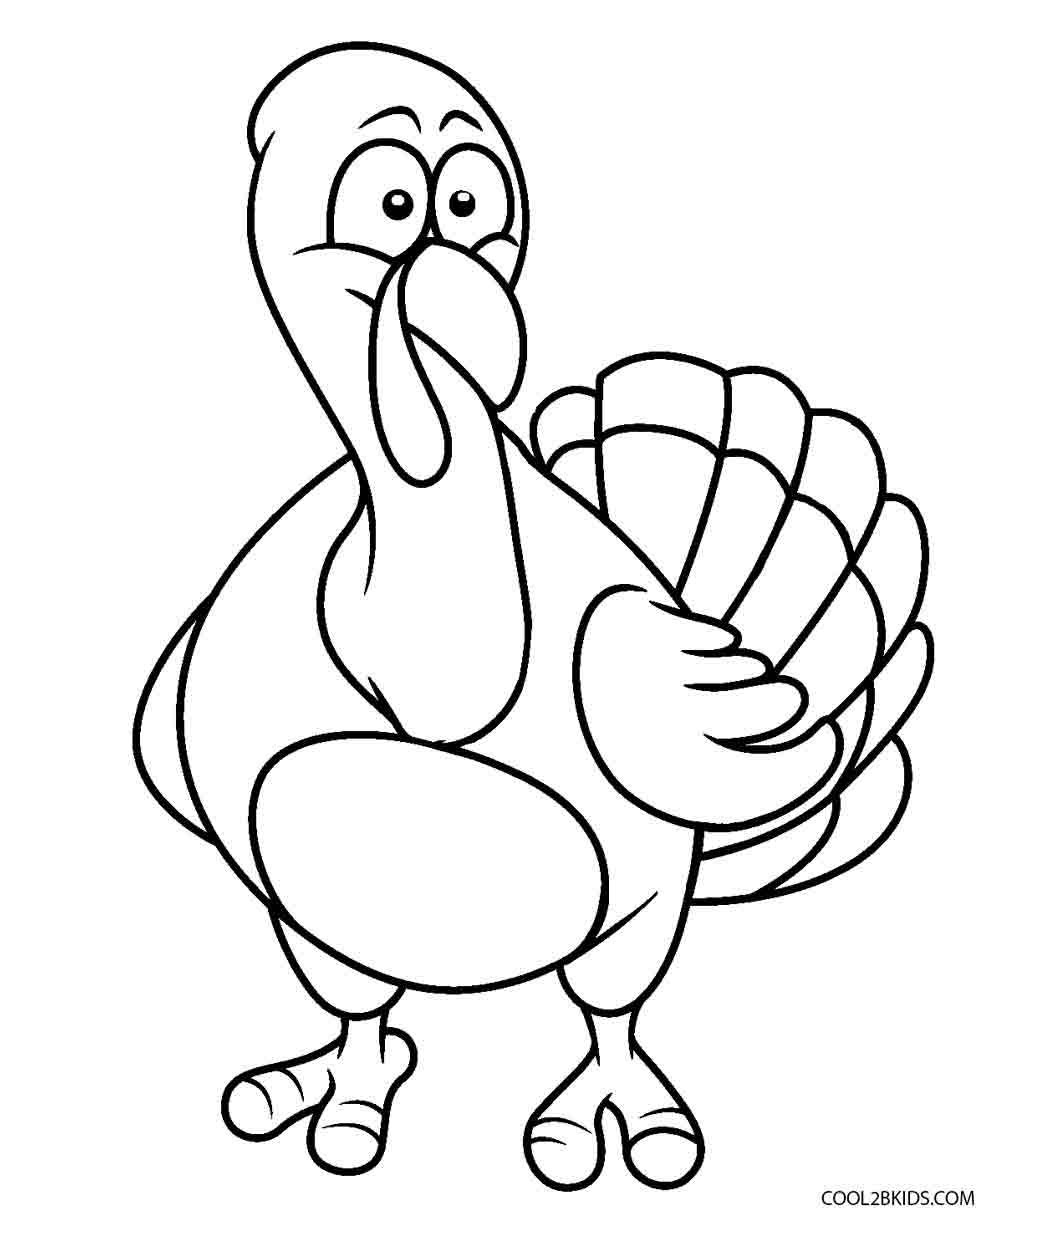 Printable Coloring Sheets For Preschoolers
 Free Printable Turkey Coloring Pages For Kids